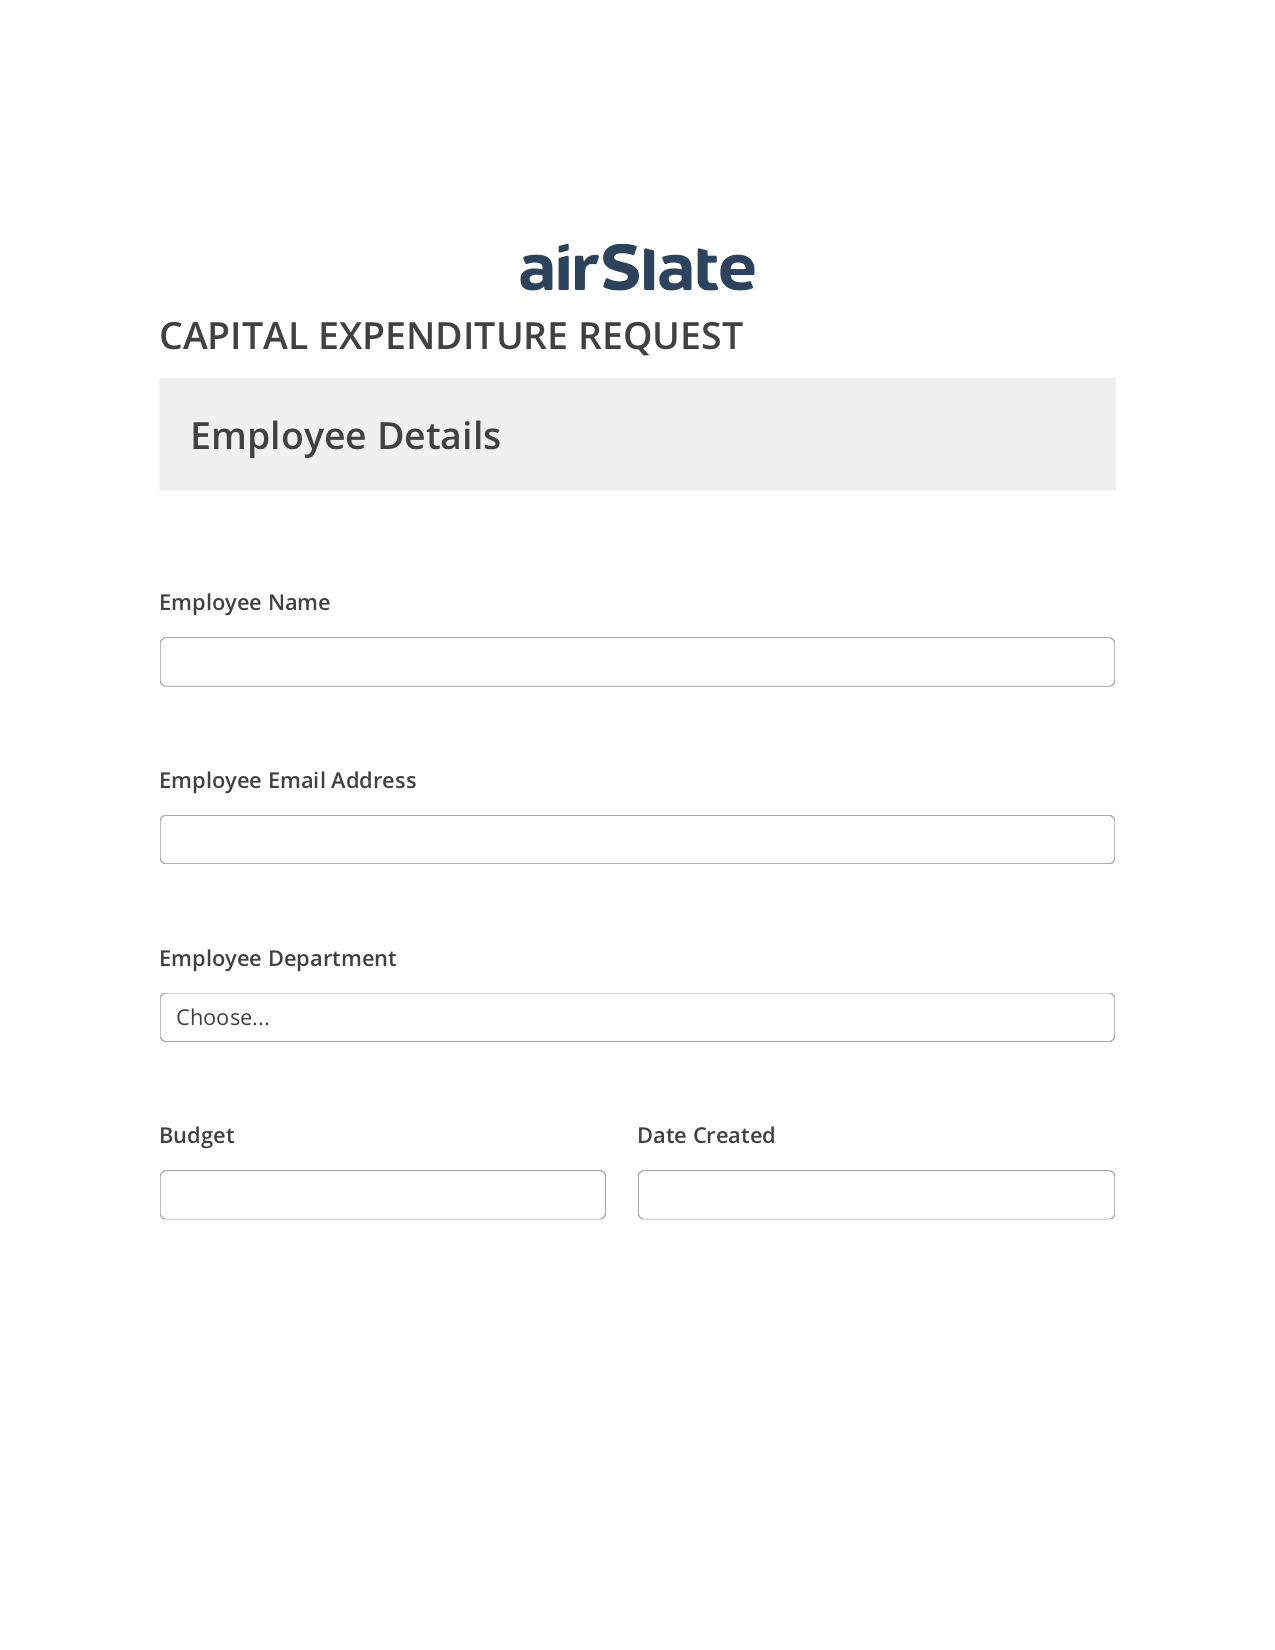 Capital Expenditure Request Approval Workflow Pre-fill from Smartsheet Bot, Create slate addon, Export to Google Sheet Bot